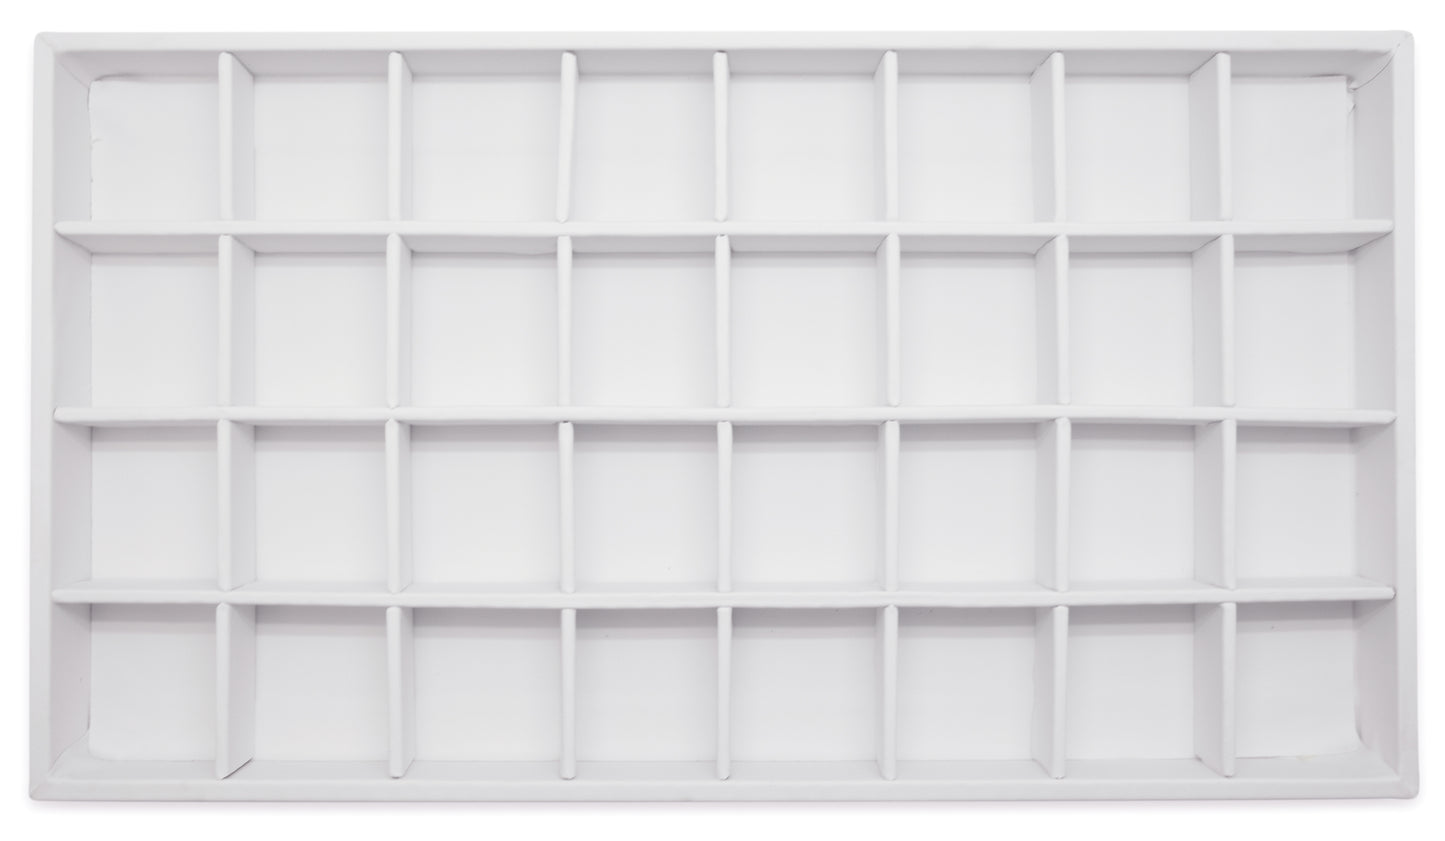 White Leatherette 32 Compartment Stackable Jewelry Tray